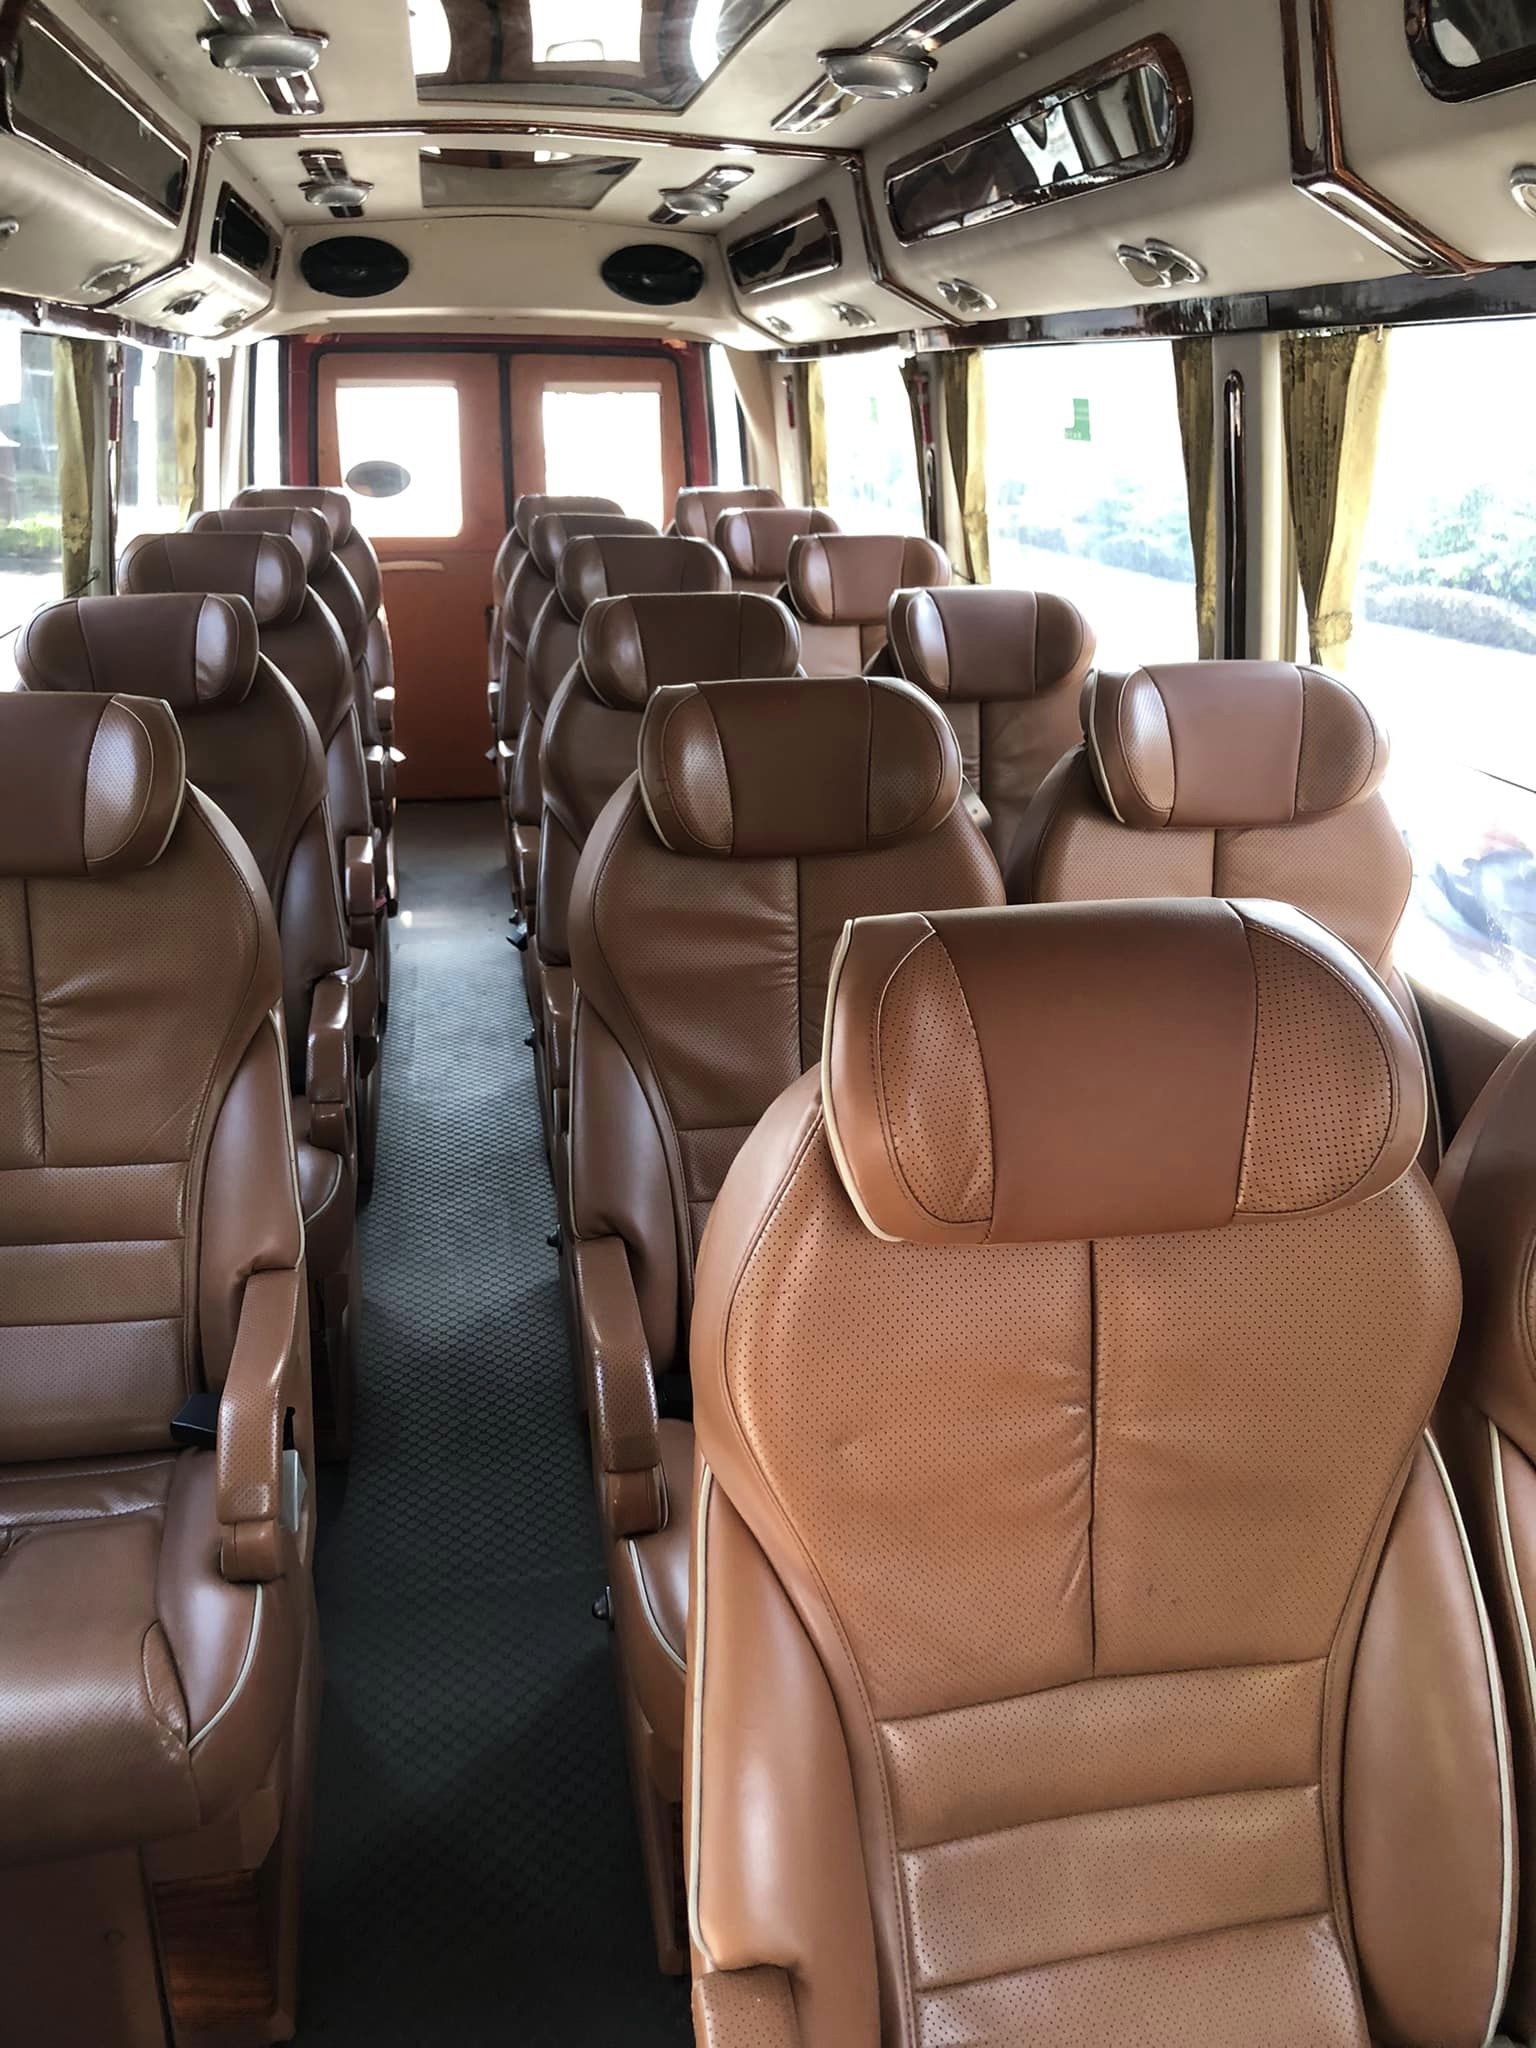 Open Bus From Siem Reap To Phnom Penh